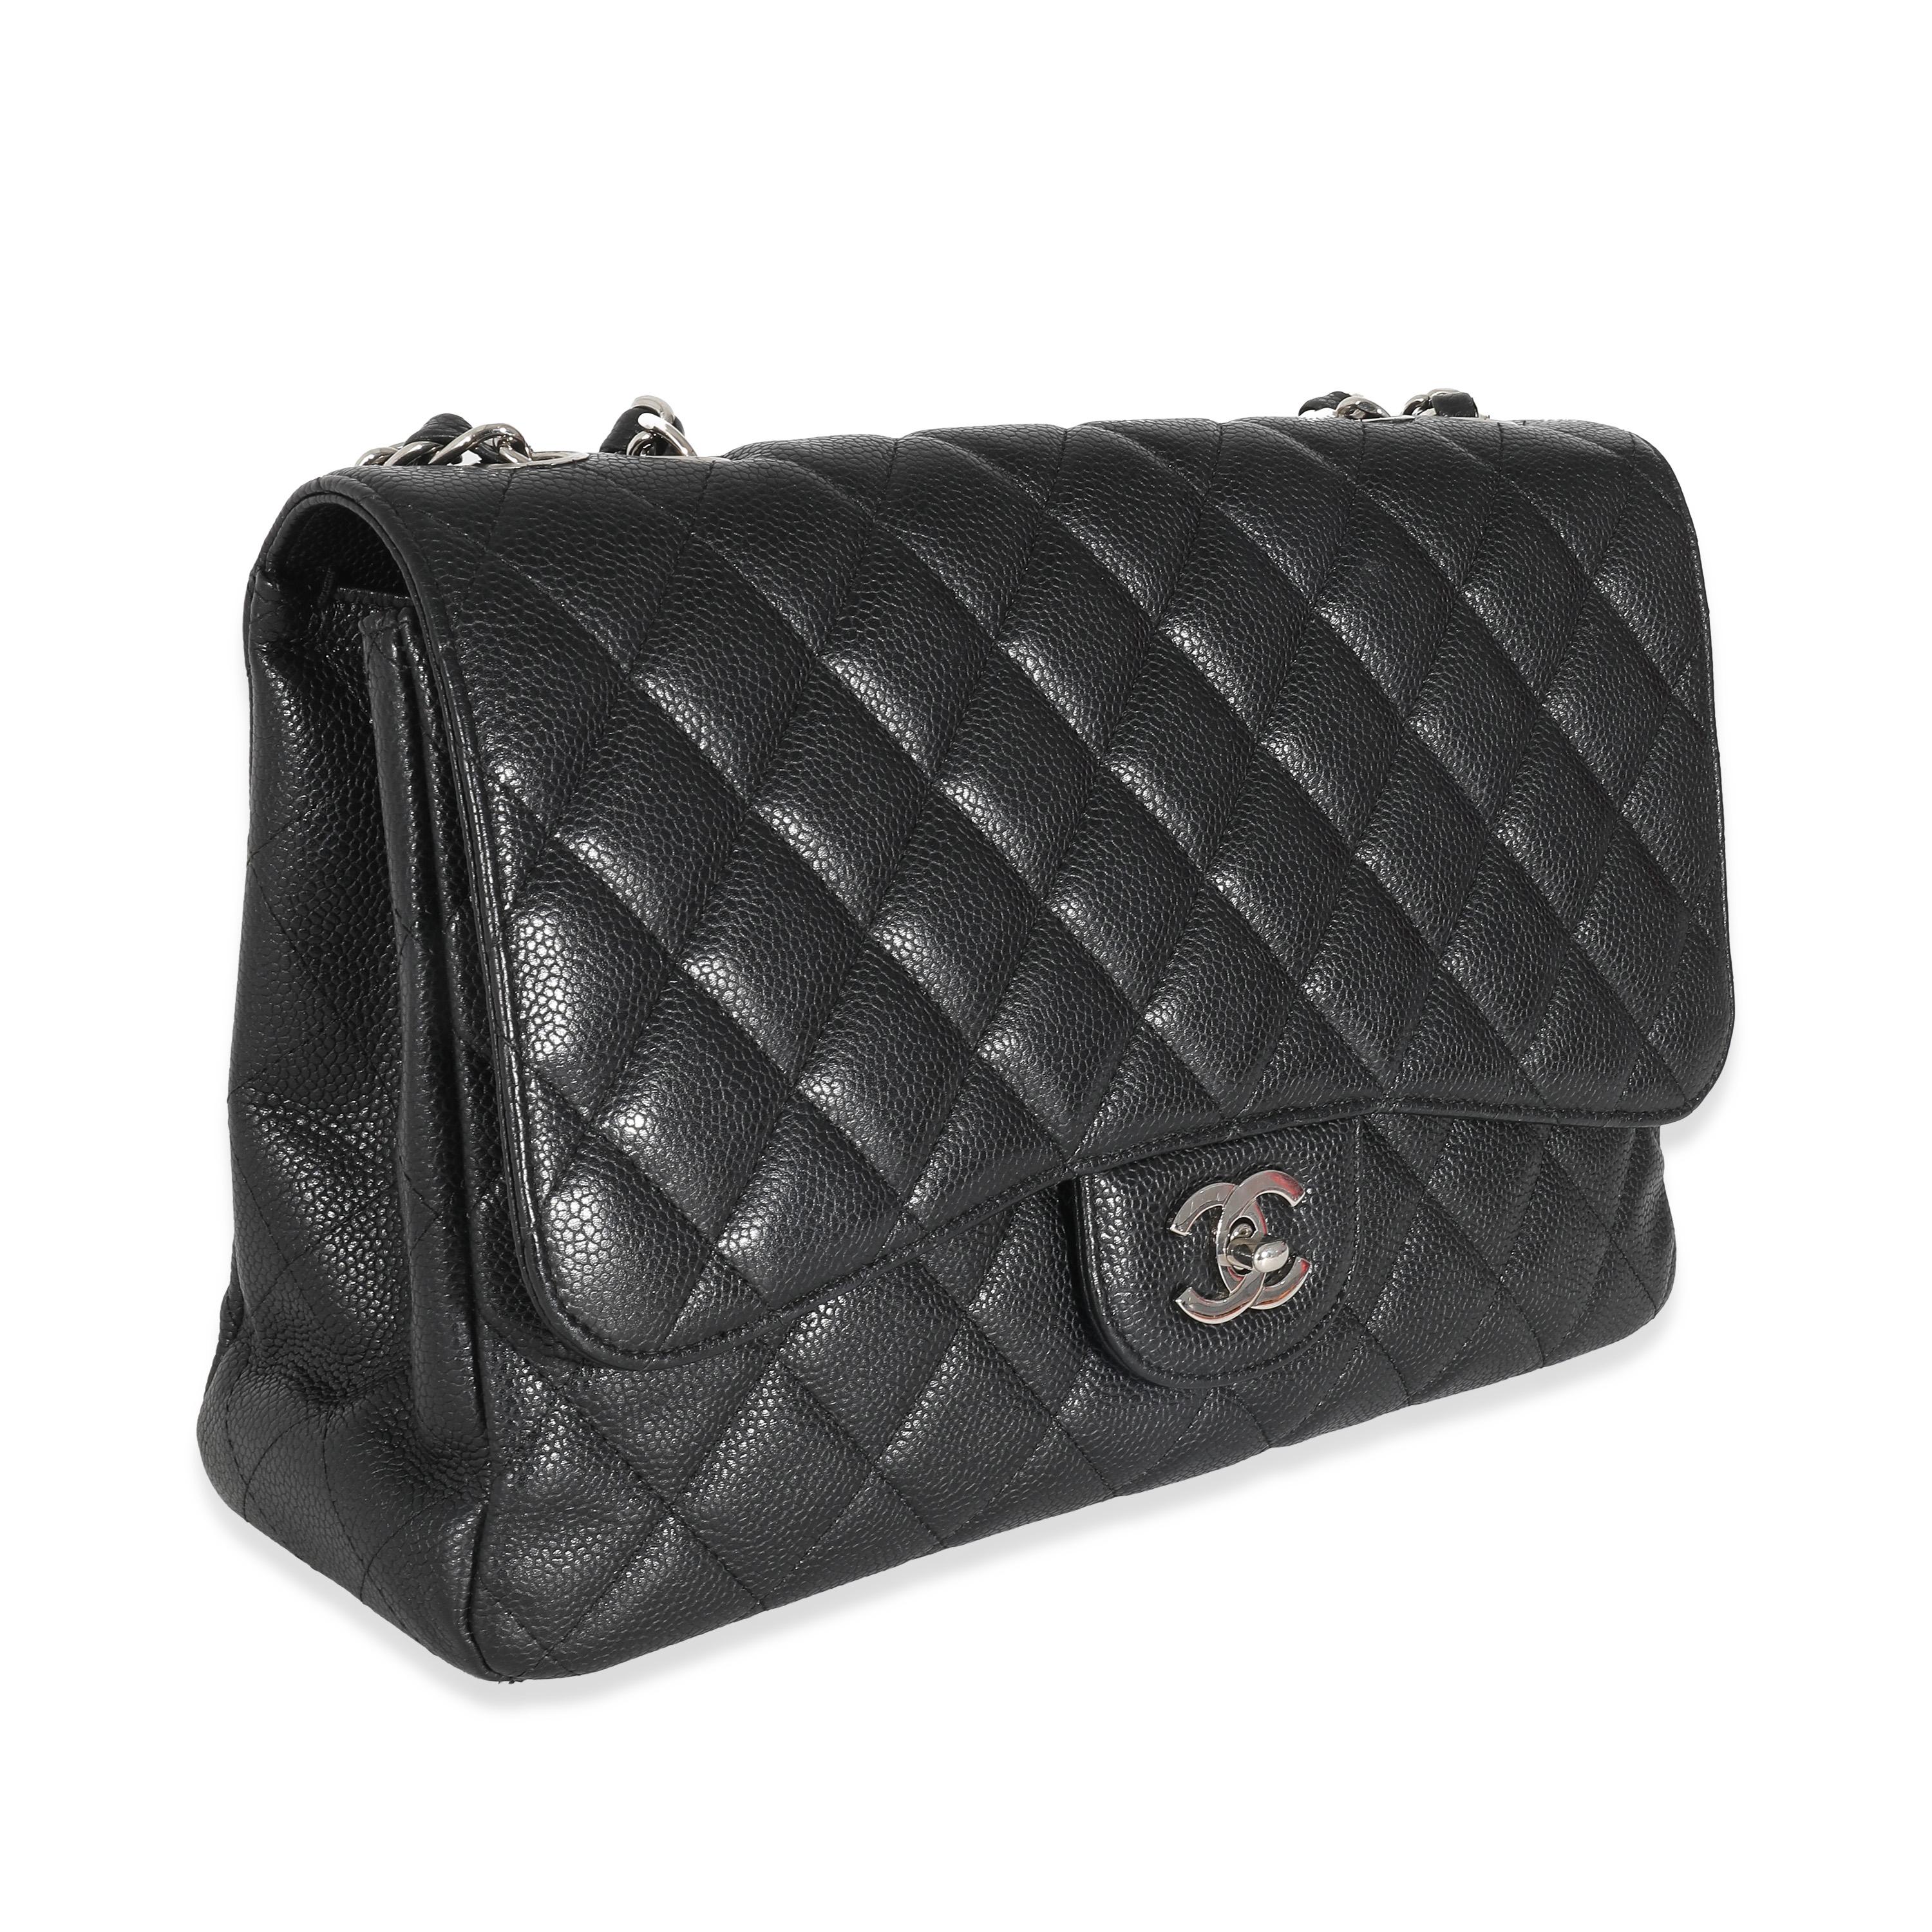 Listing Title: Chanel Black Quilted Caviar Jumbo Classic Single Flap
SKU: 137022
Condition: Pre-owned 
Condition Description: A timeless classic that never goes out of style, the flap bag from Chanel dates back to 1955 and has seen a number of